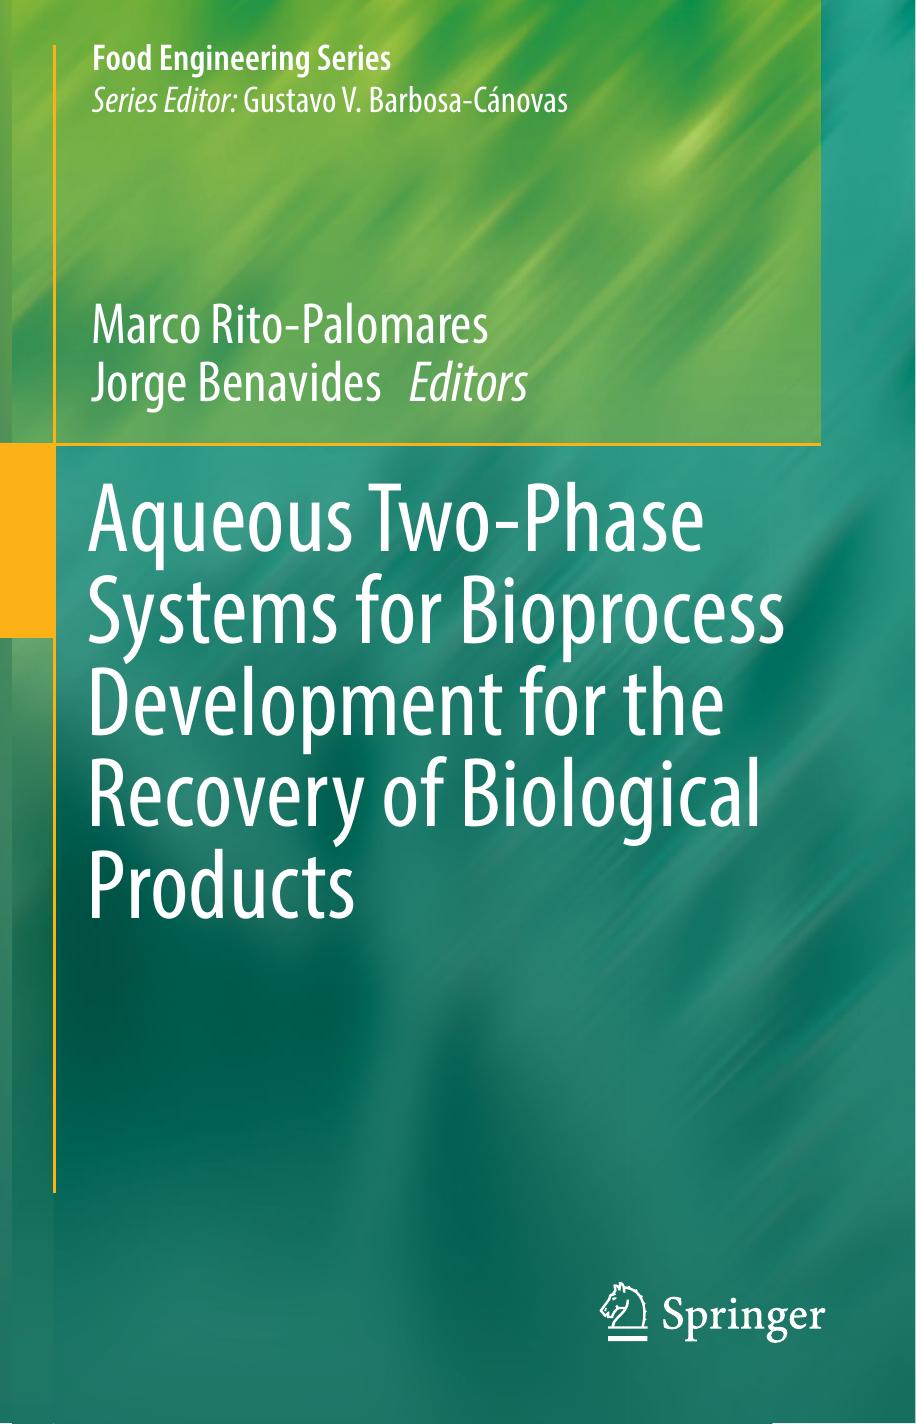 Aqueous Two-Phase Systems for Bioprocess Development for the Recovery of Biological Products-Springer International Publishing  2017